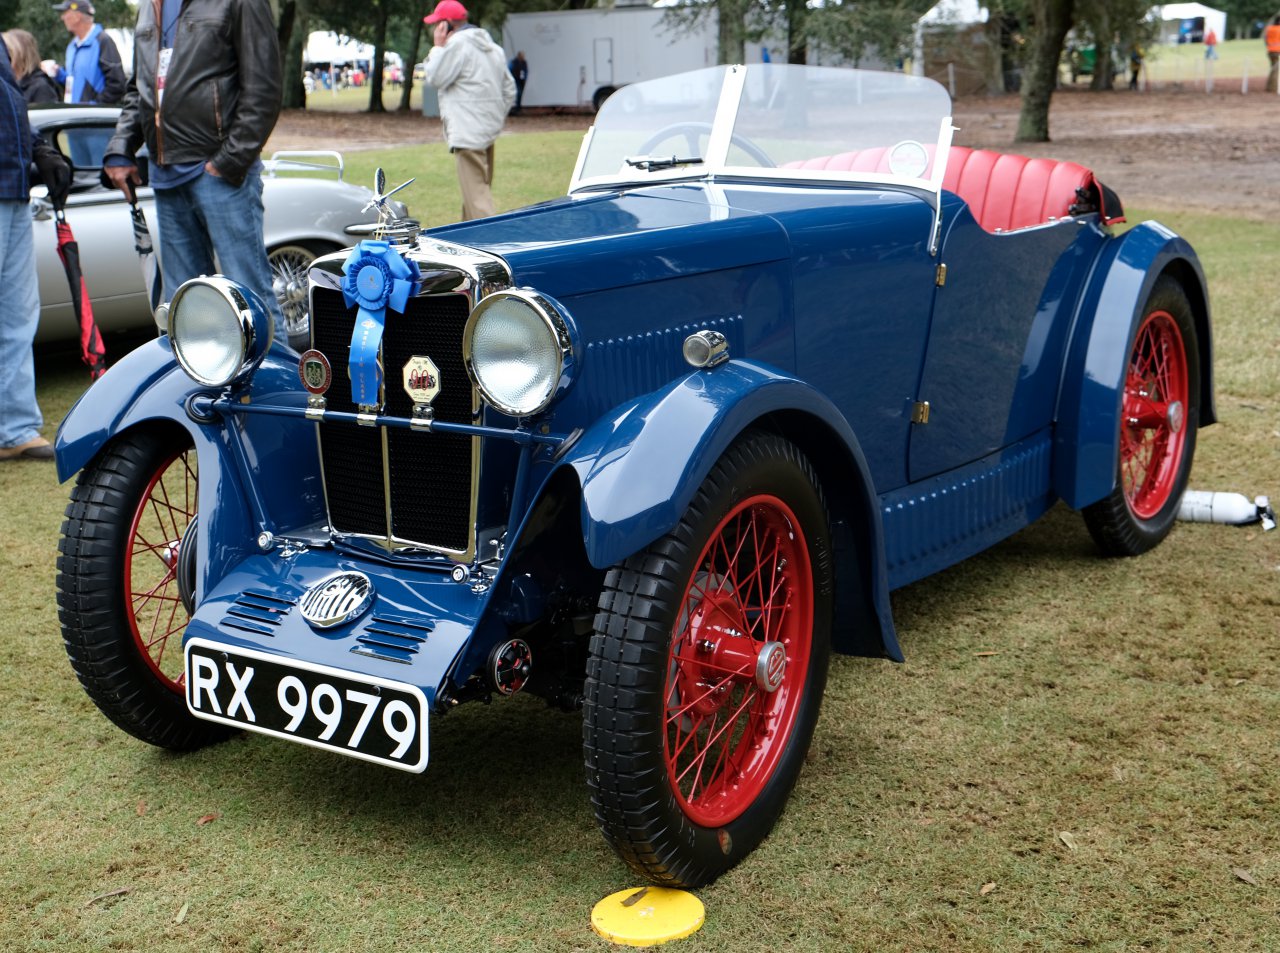 Hilton Head, Hilton Head again overcomes challenges to stage first-class concours, ClassicCars.com Journal